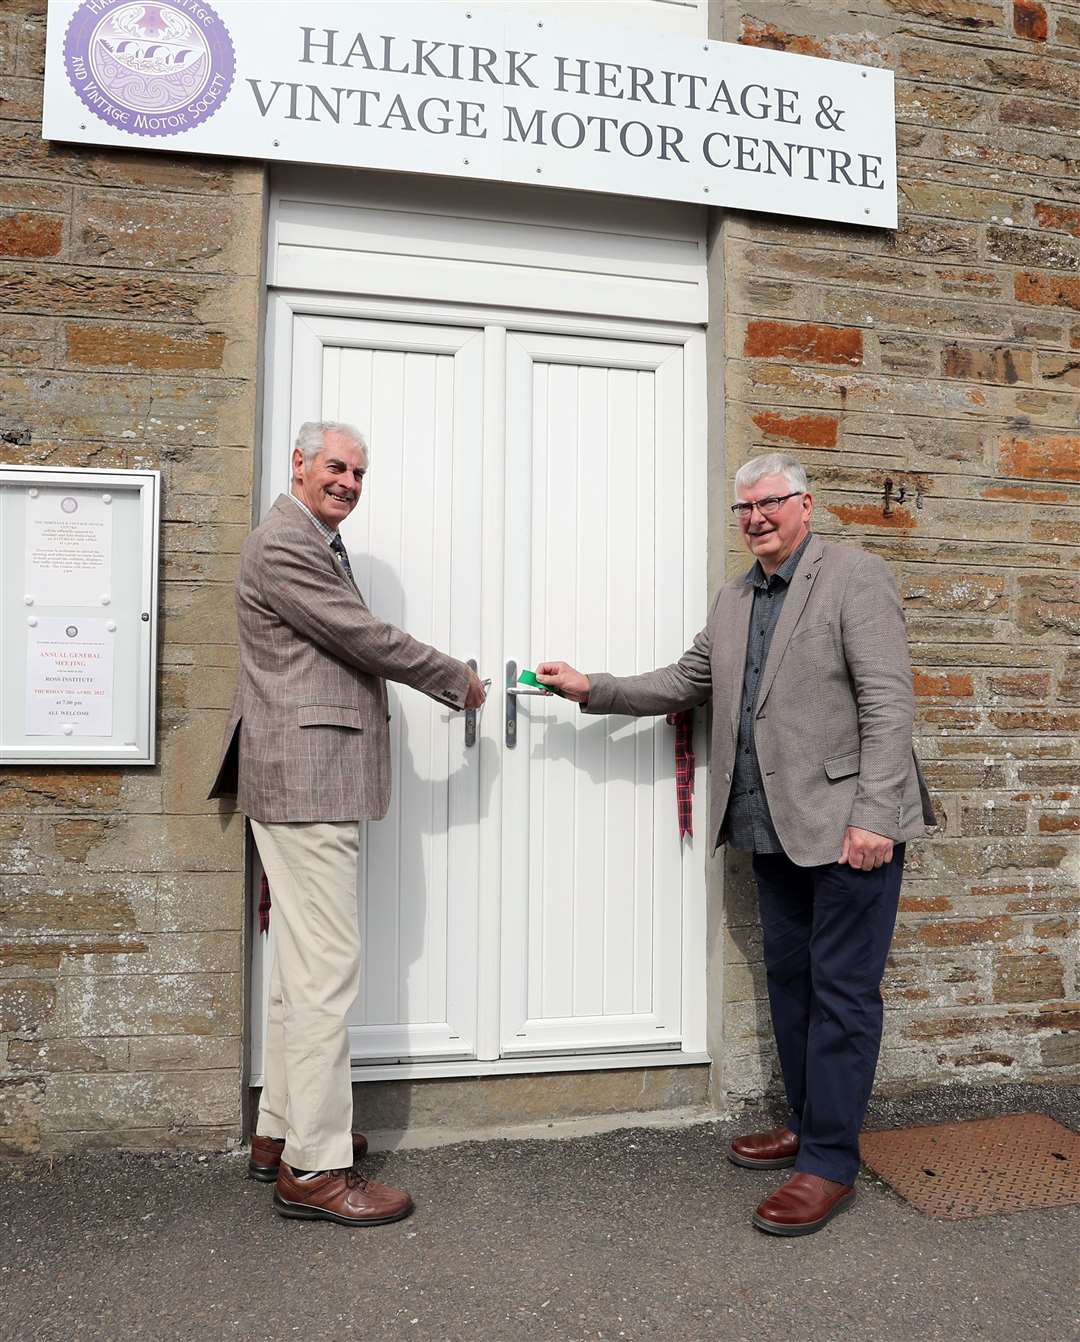 Edward Sutherland's cousins Alasdair and Iain Sutherland cut the ribbon to open the Halkirk Heritage and Vintage Motor Centre on Saturday. Picture: James Gunn